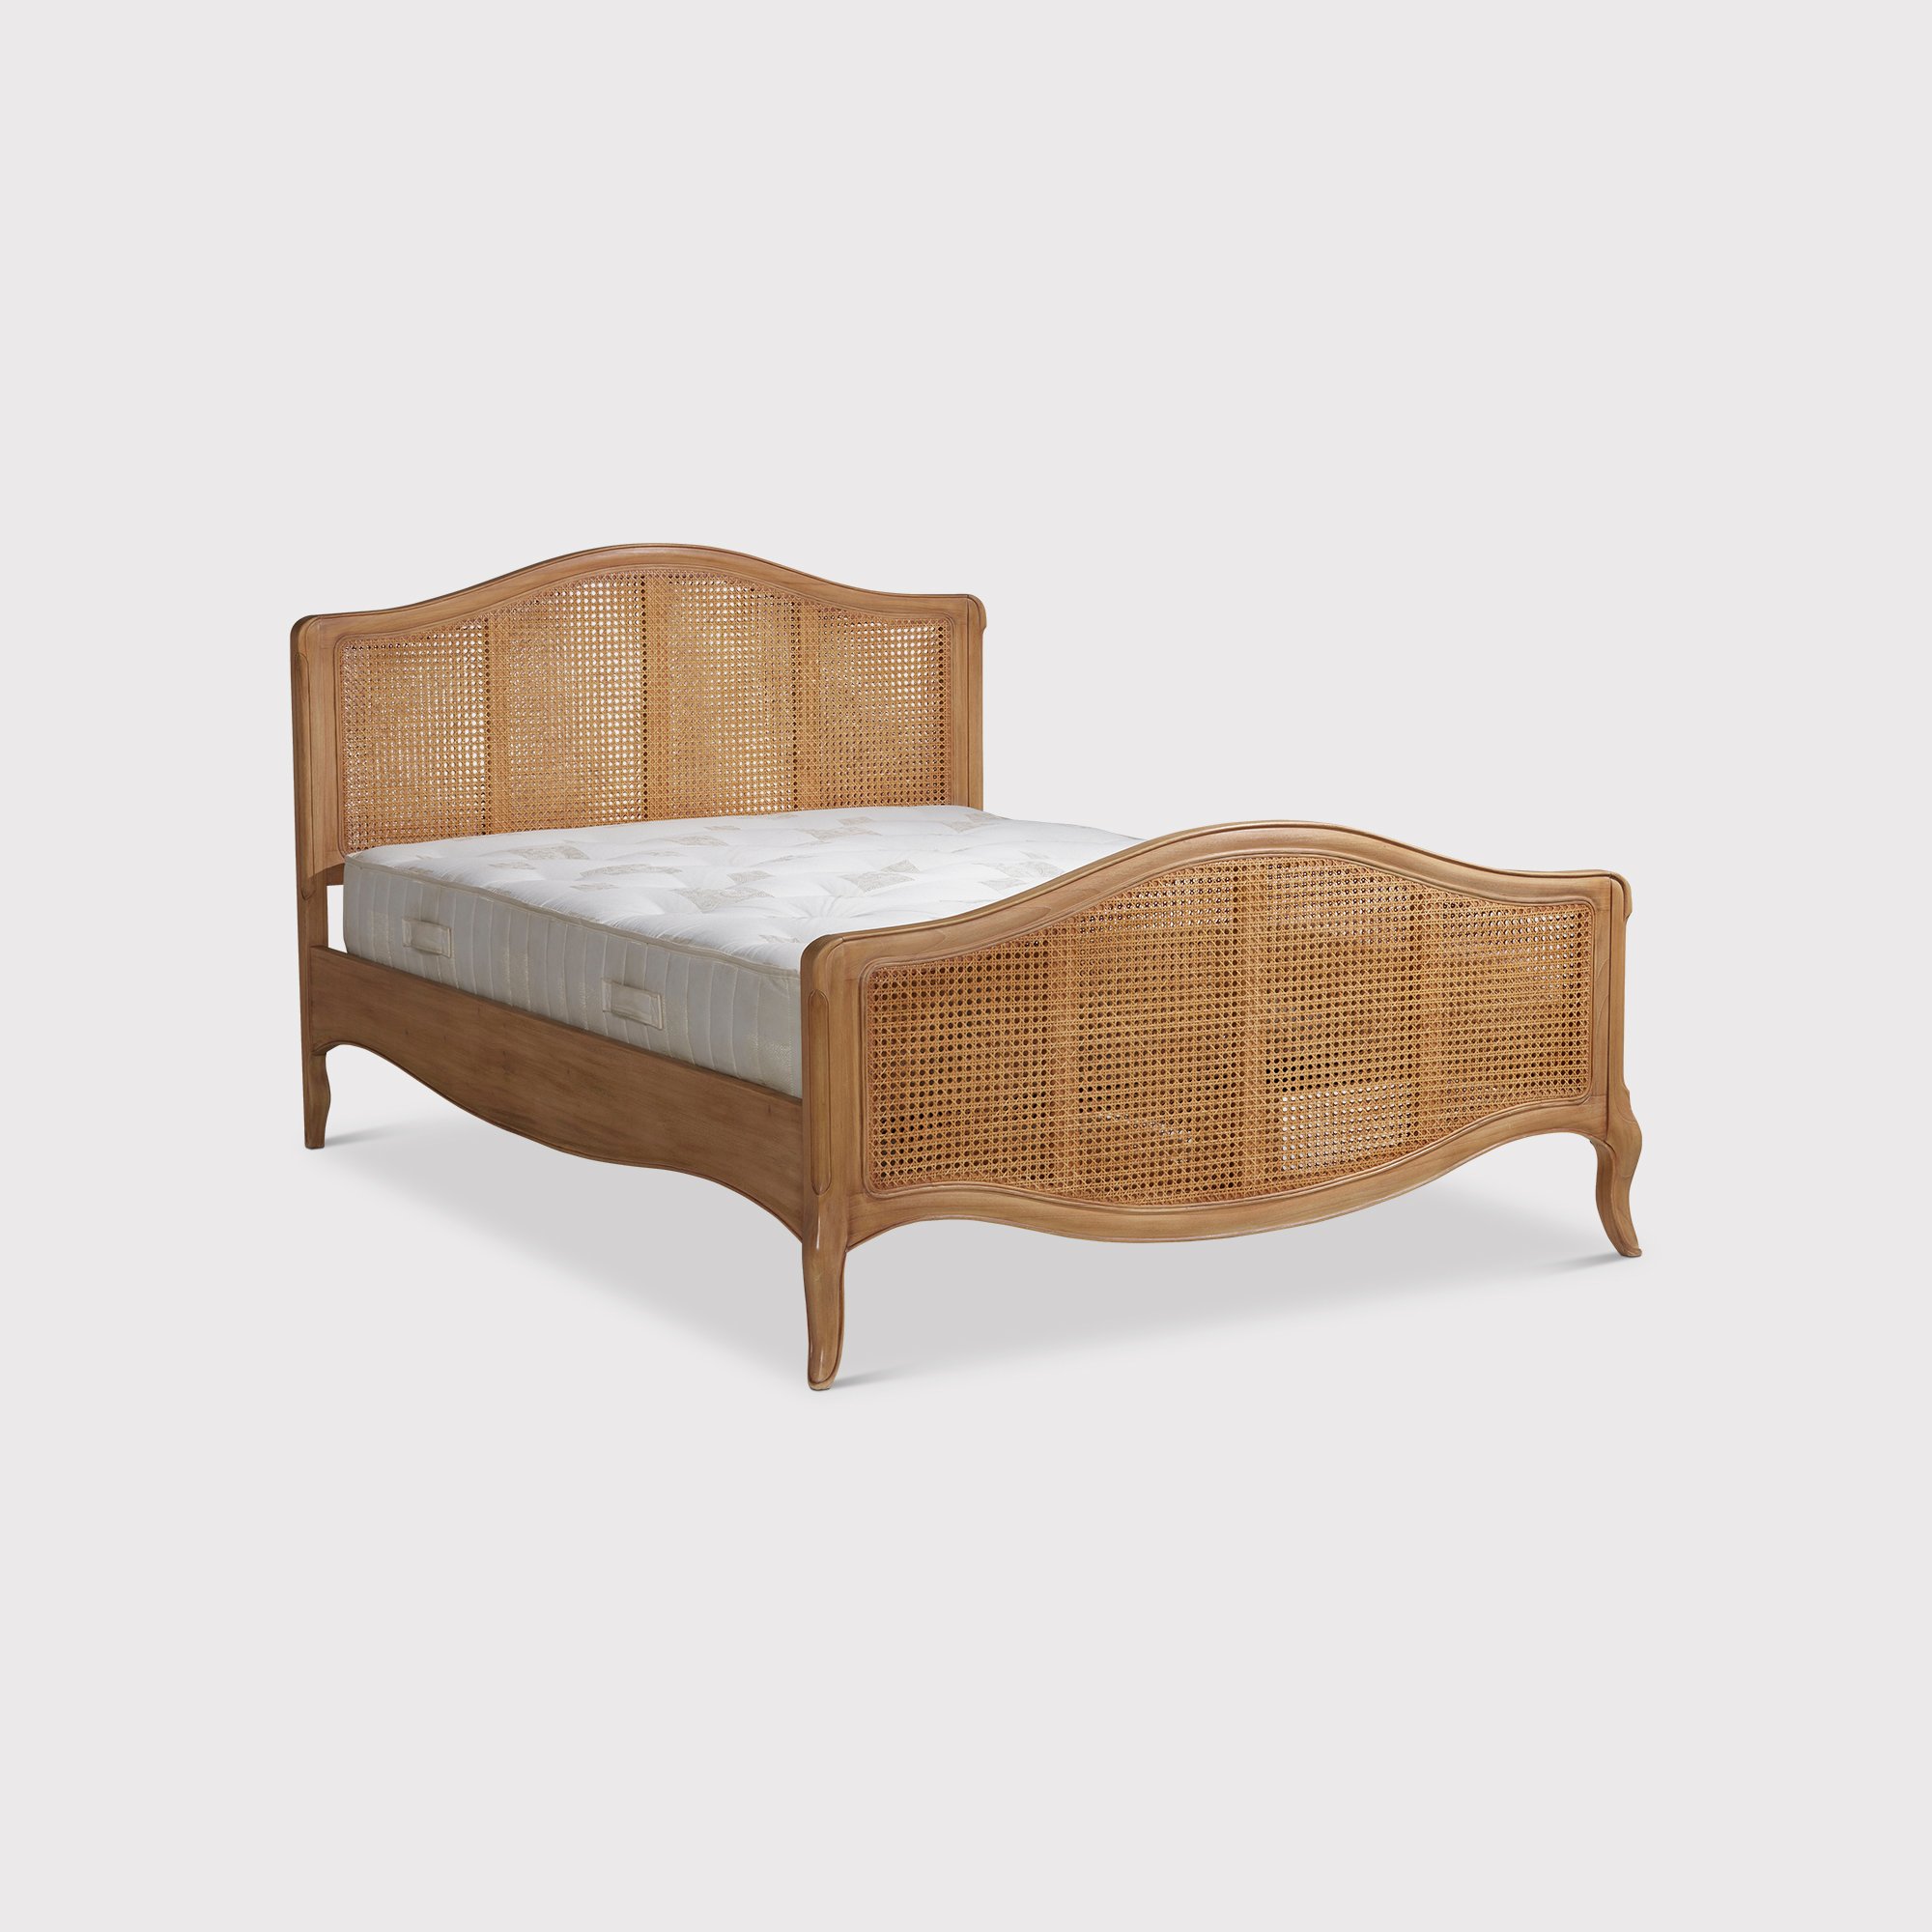 Cecile 150cm High Foot End Bed, Neutral | King | Barker & Stonehouse